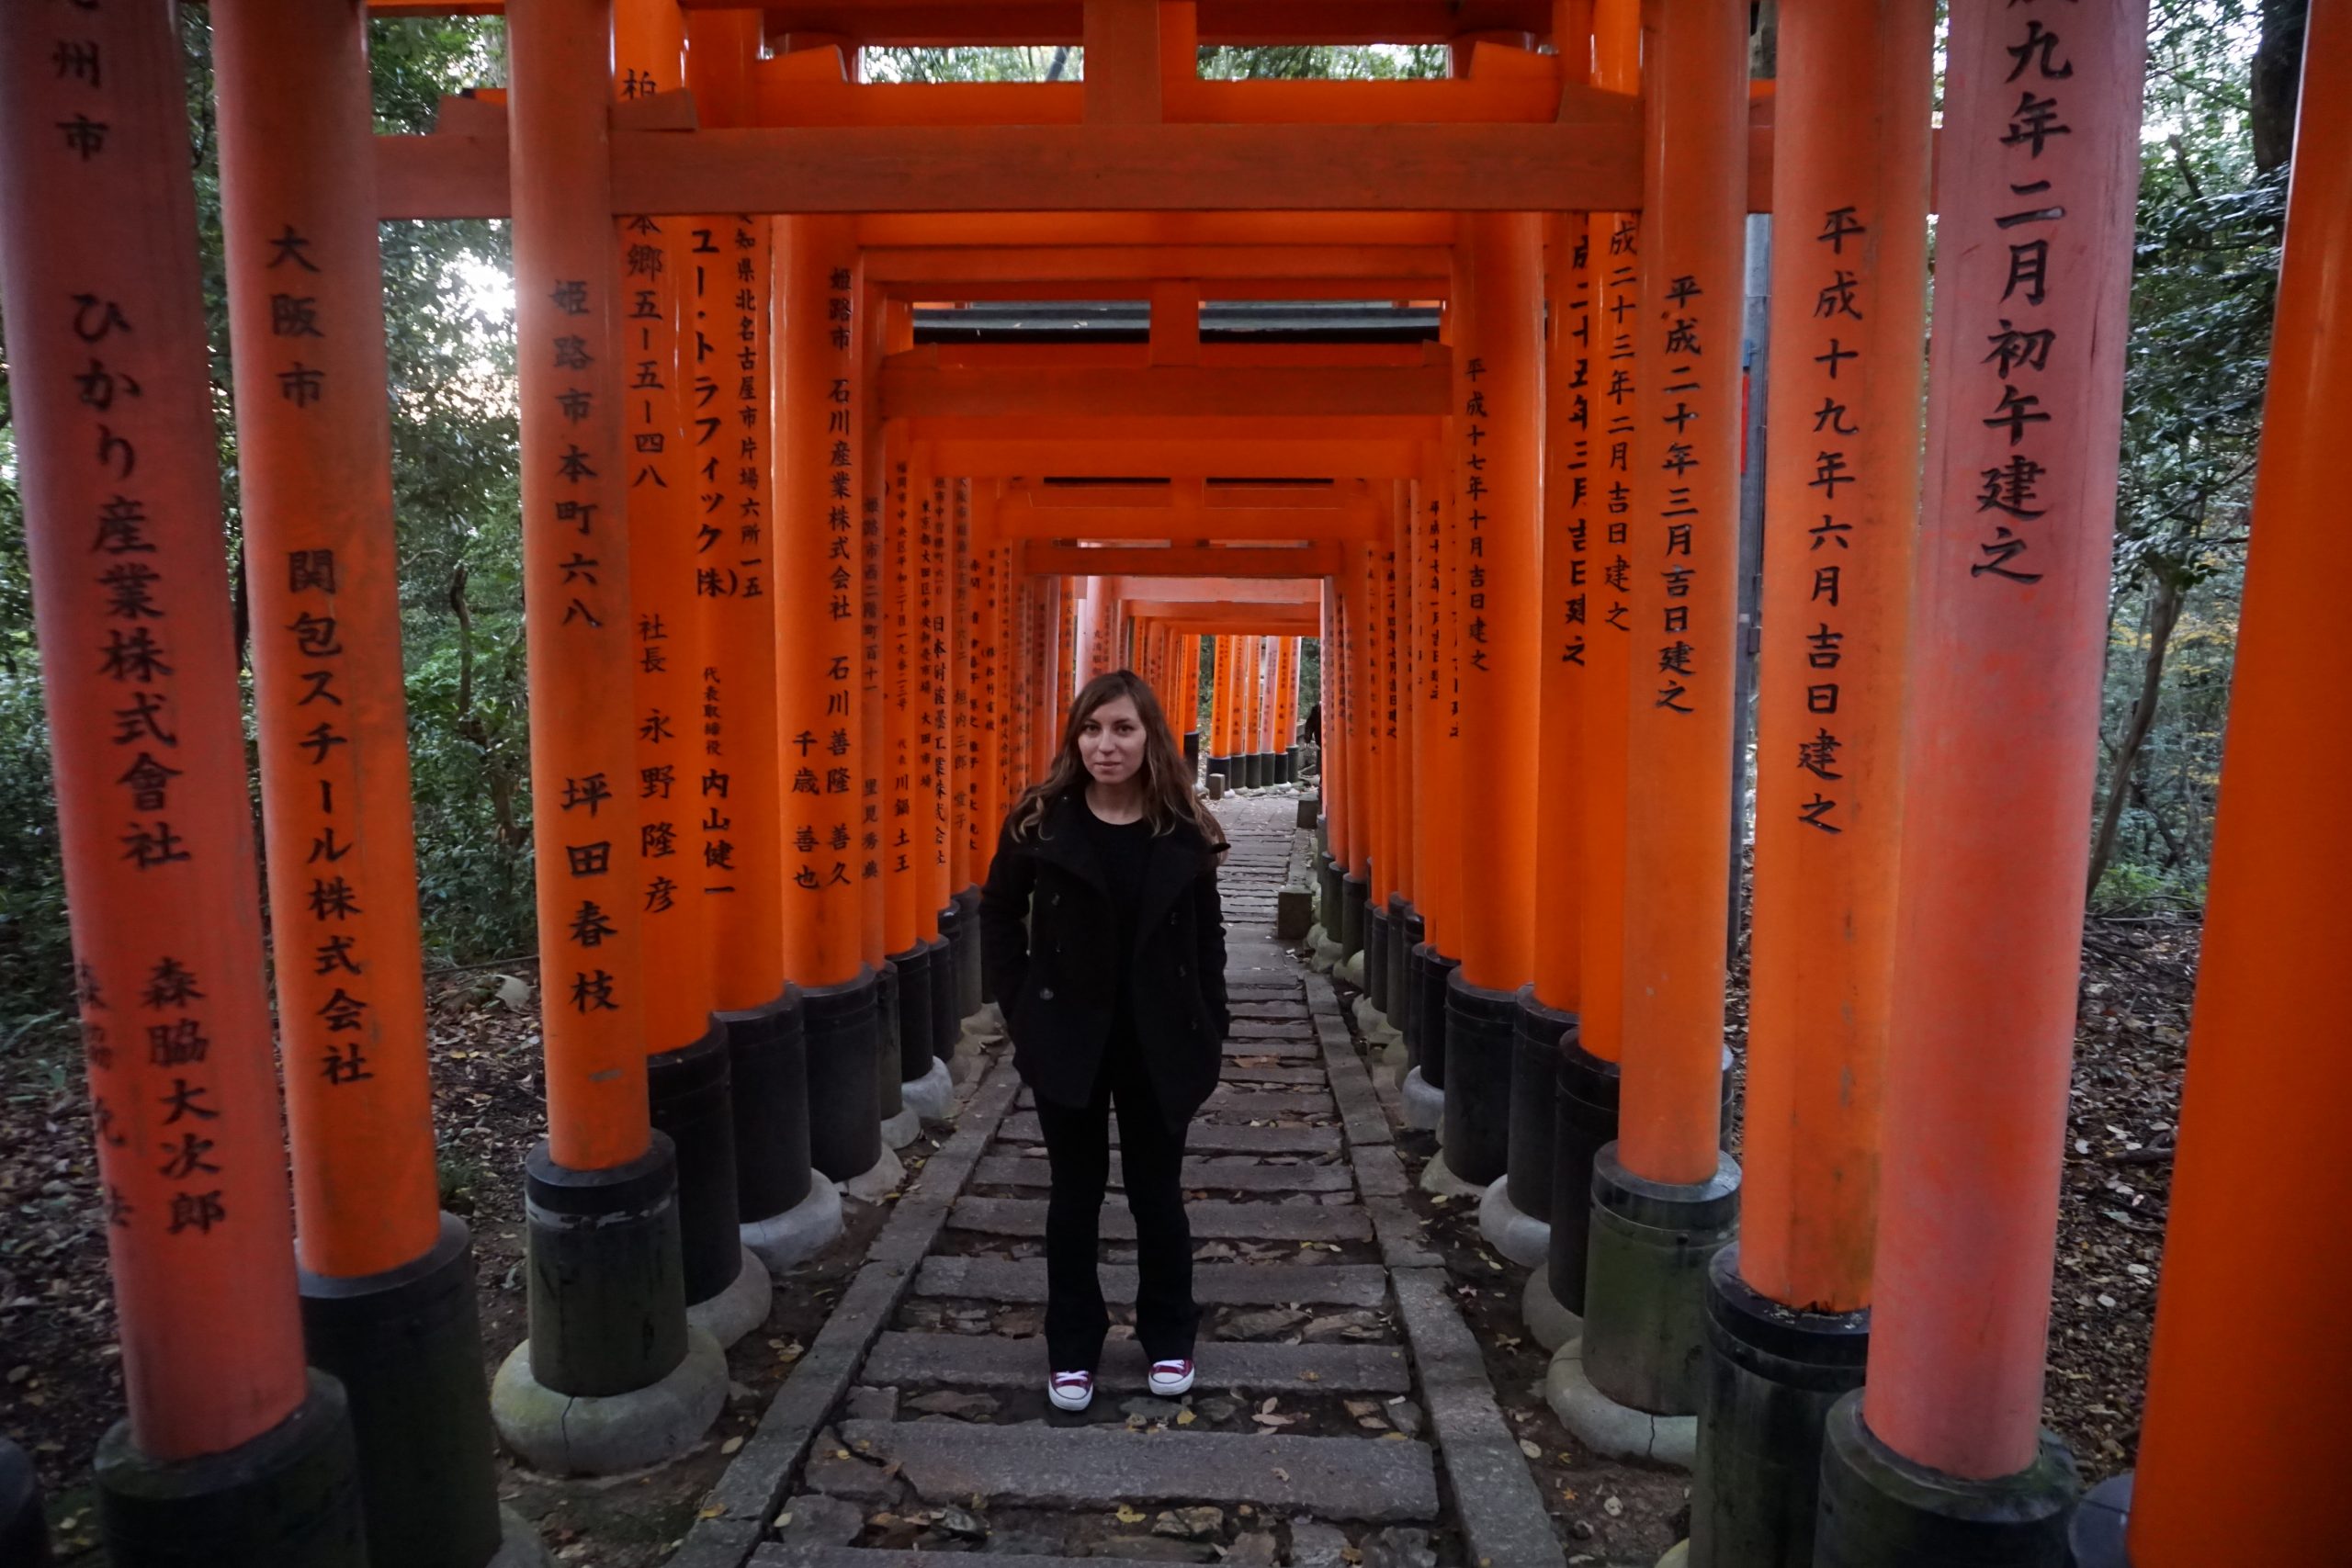 Cory from You Could Travel climbing stairs during the hike at Fushimi Inari Shrine.